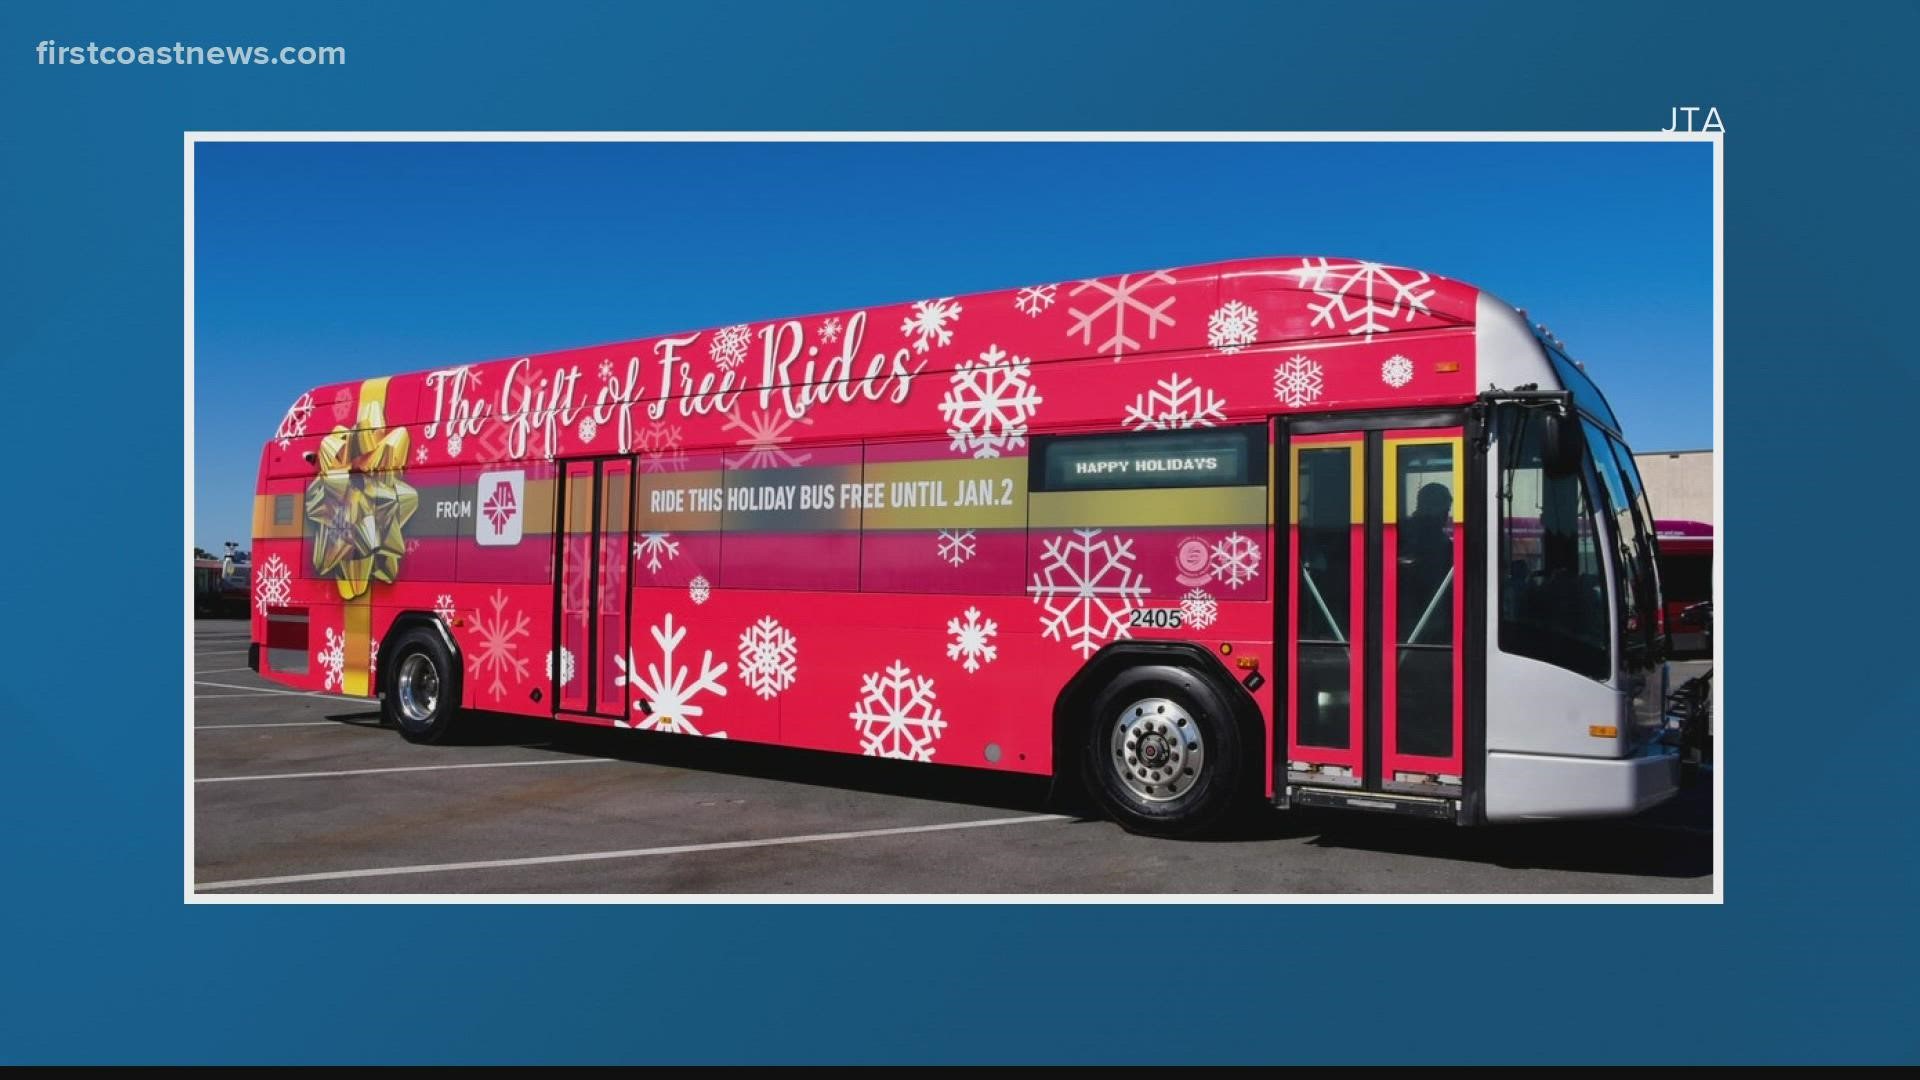 Bus riders across Jacksonville will get to enjoy Christmas music and holiday decorations on the bus with Santa at the wheel.